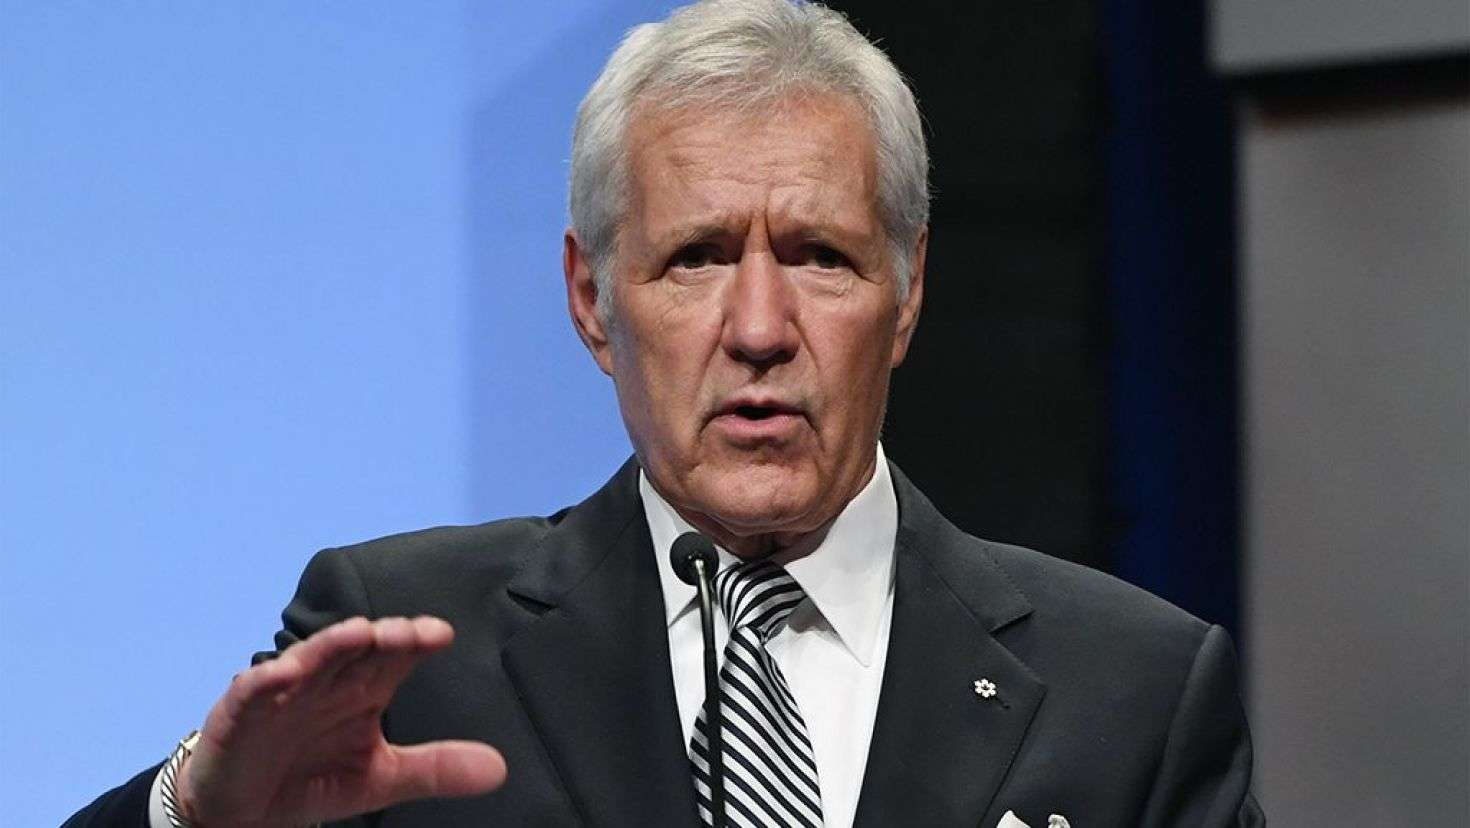 Trebek has crawled into the hearts of viewers everywhere. Image credit: Getty/GlobalImagesUkraine